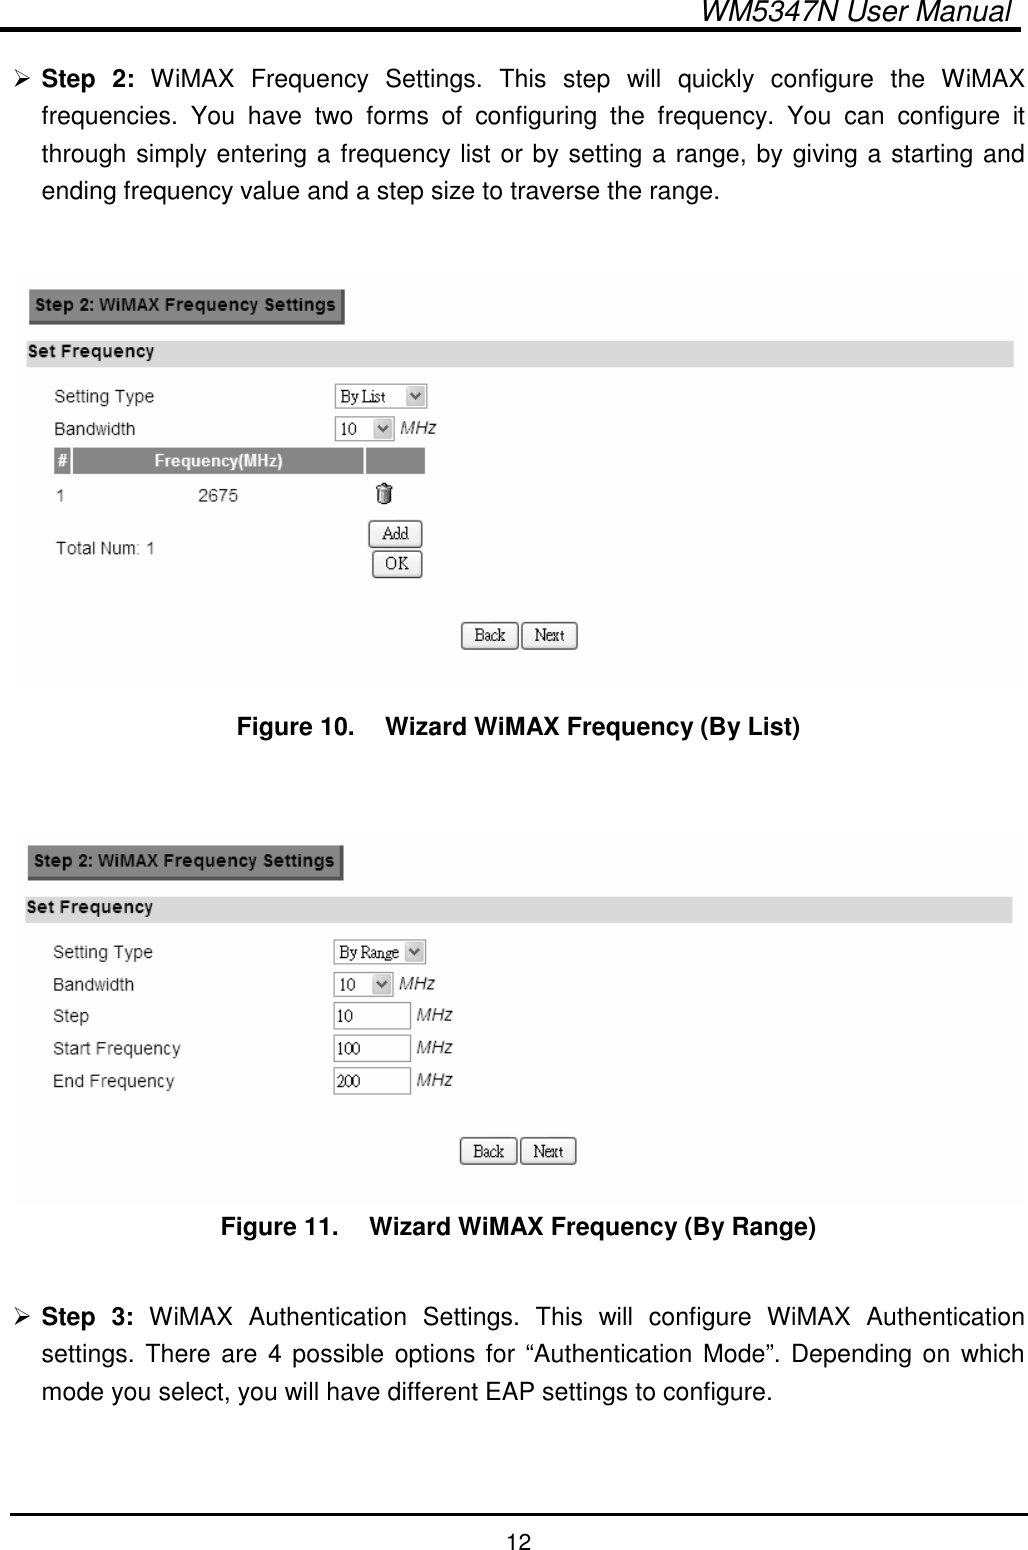  WM5347N User Manual  12  Step  2:  WiMAX  Frequency  Settings.  This  step  will  quickly  configure  the  WiMAX frequencies.  You  have  two  forms  of  configuring  the  frequency.  You  can  configure  it through simply entering a frequency list or by setting a range, by giving a starting and ending frequency value and a step size to traverse the range.   Figure 10.   Wizard WiMAX Frequency (By List)    Figure 11.   Wizard WiMAX Frequency (By Range)   Step  3:  WiMAX  Authentication  Settings.  This  will  configure  WiMAX  Authentication settings. There are 4 possible options for  “Authentication  Mode”. Depending on which mode you select, you will have different EAP settings to configure. 